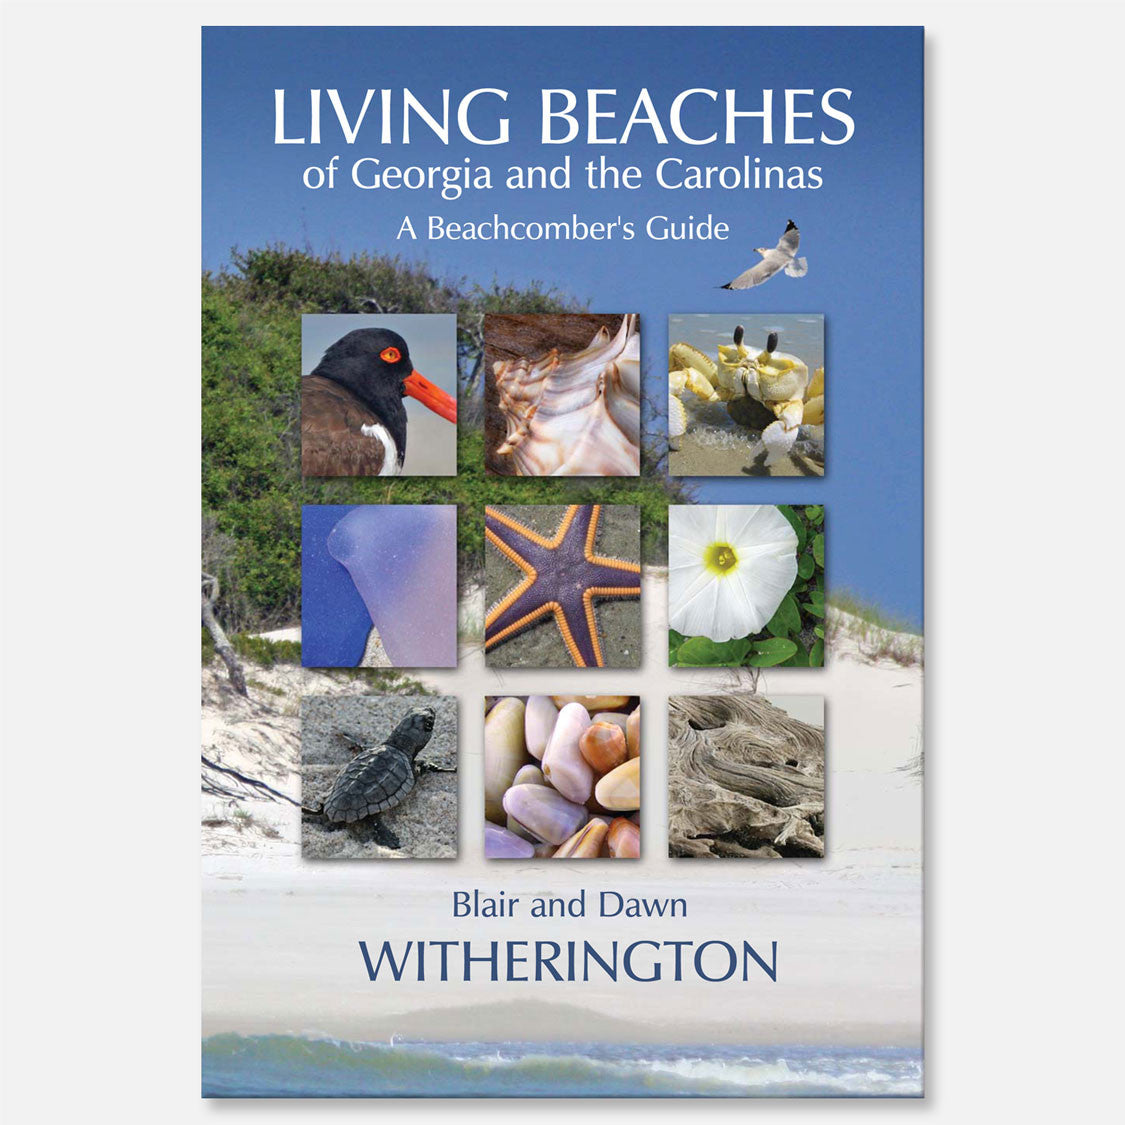 Living Beaches of Georgia and the Carolina's by Blair and Dawn Witherington